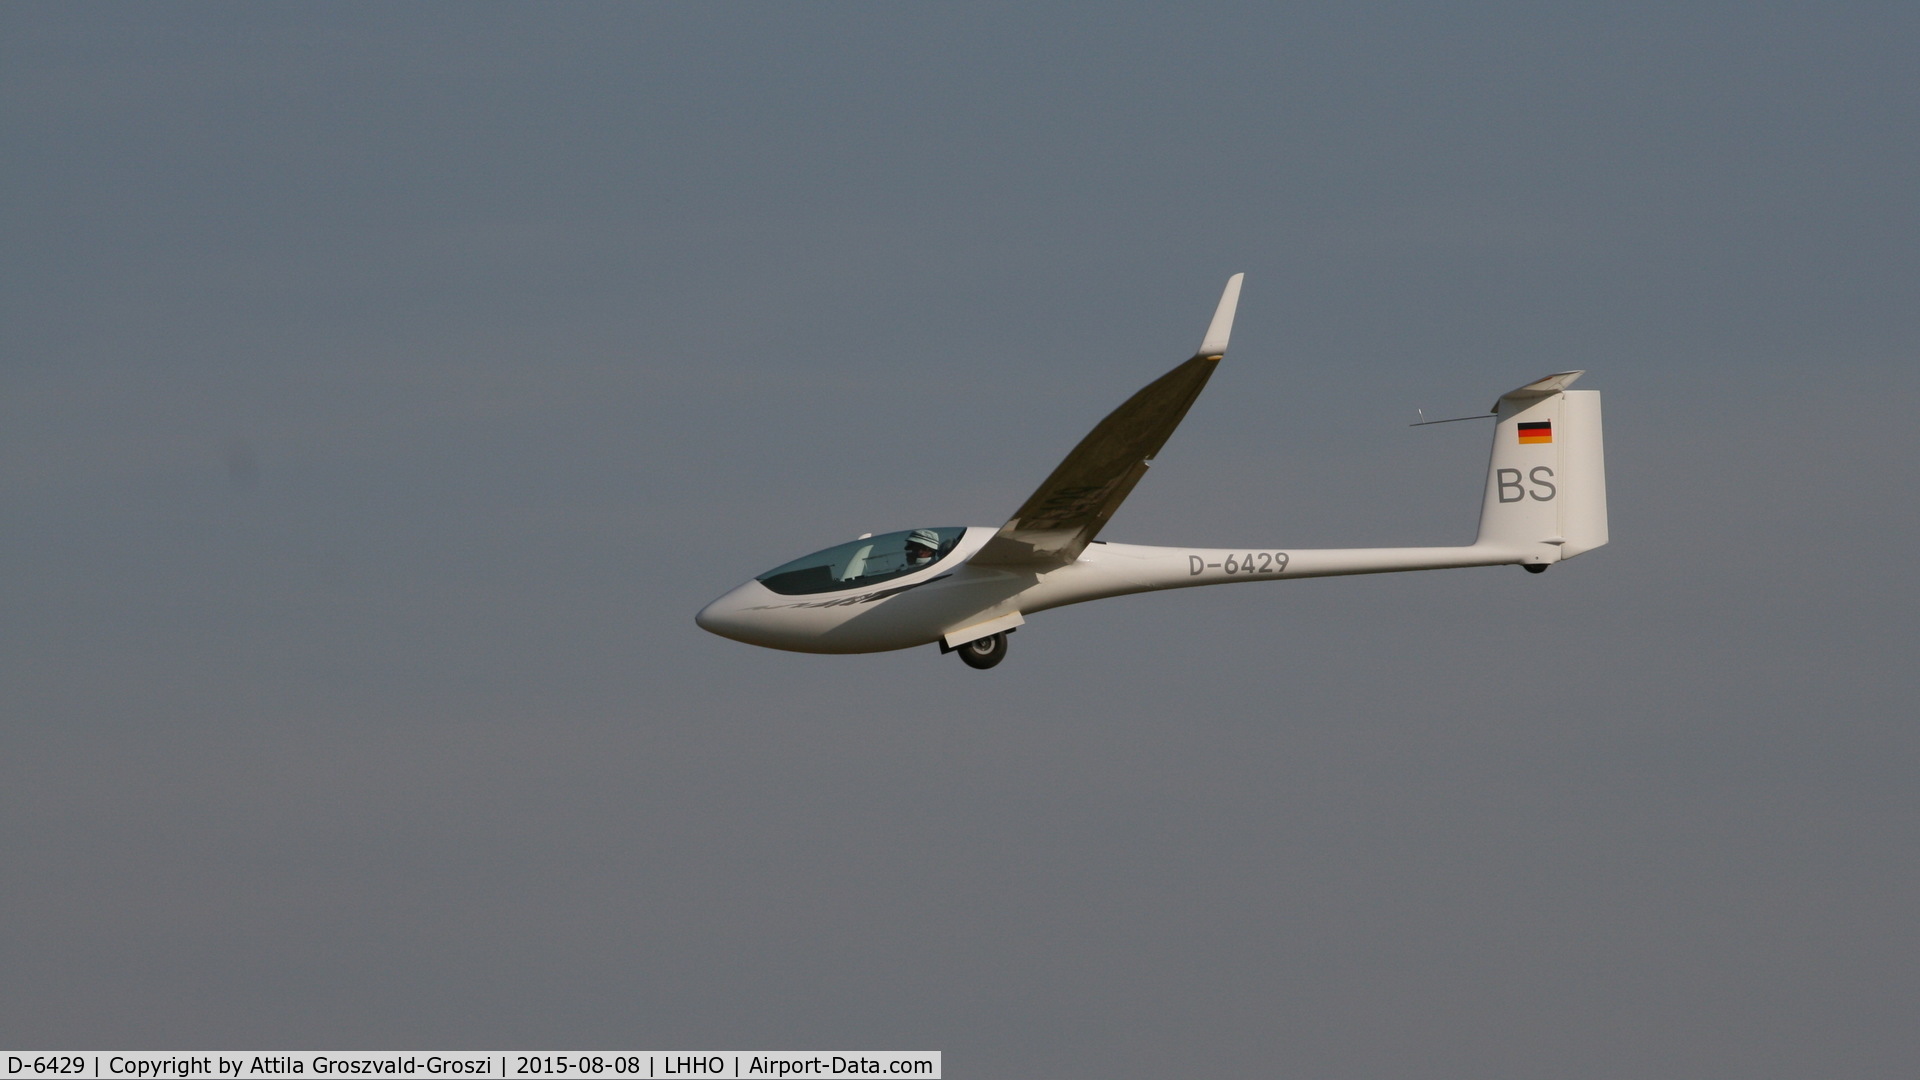 D-6429, 2010 Schleicher ASG-29 C/N 29642, Hajdúszoboszló Airport, Hungary - 60. Hungary Gliding National Championship and third Civis Thermal Cup, 2015